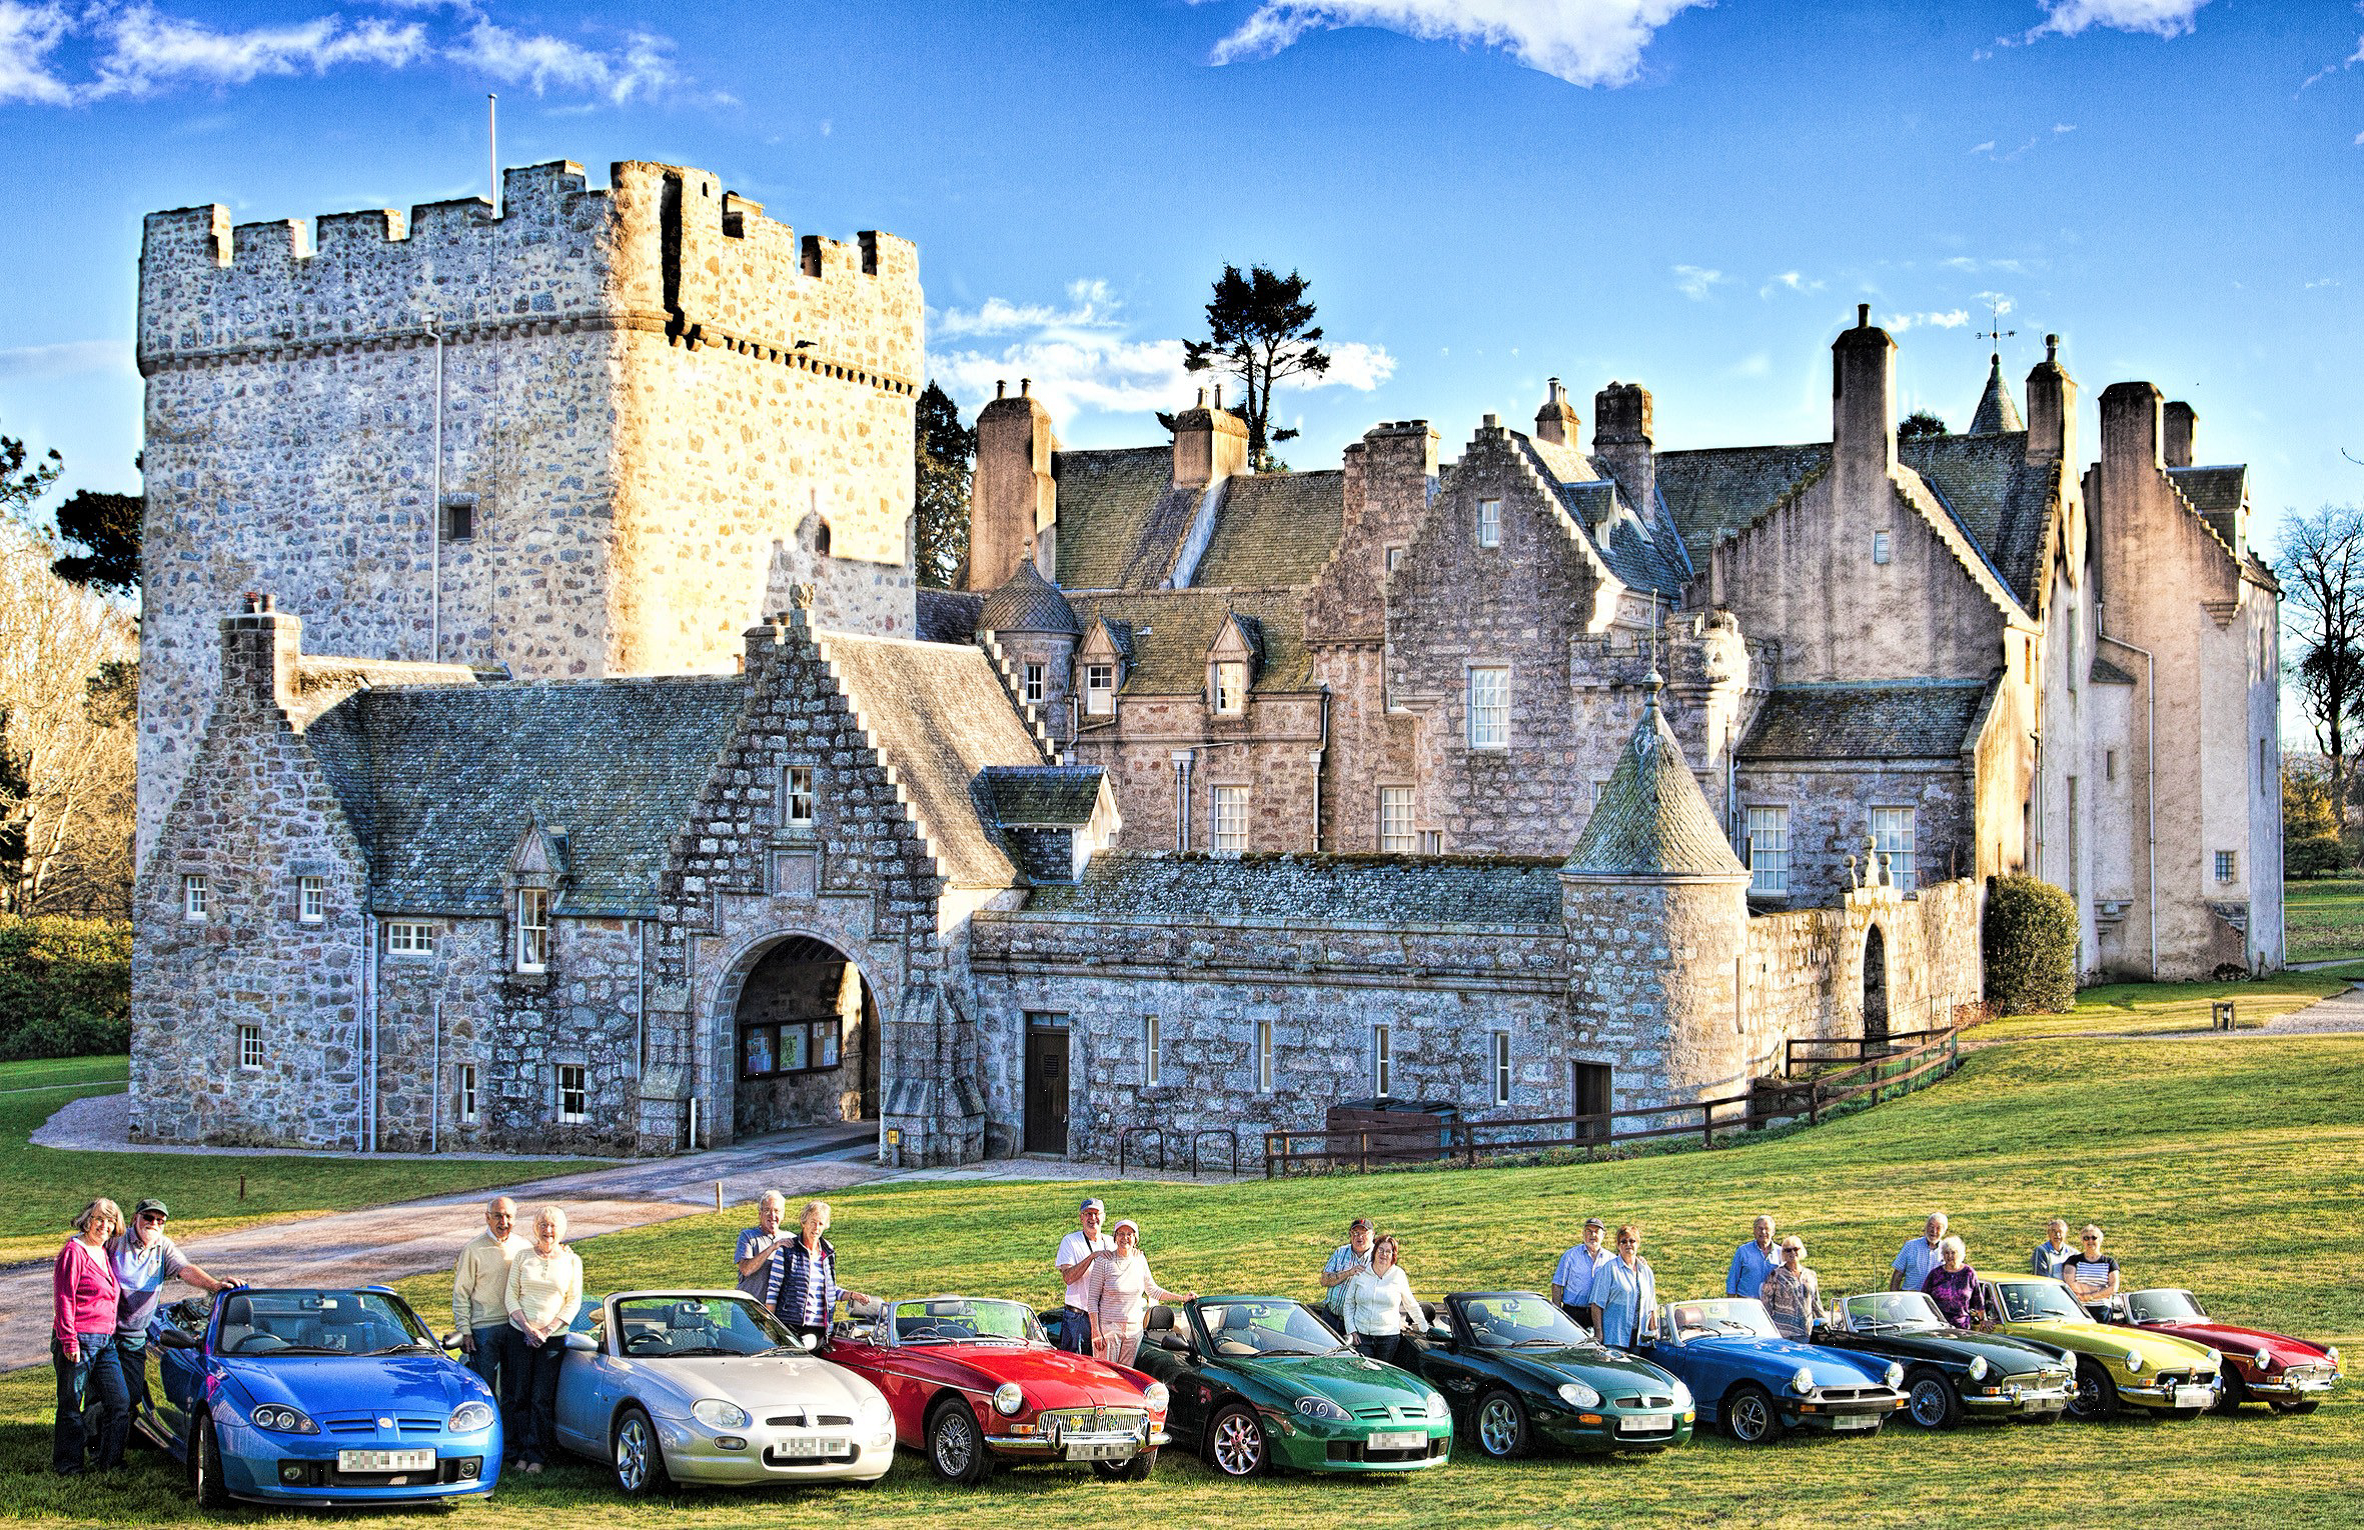 Aberdeen MG Owners Club will host their annual show at Drum Castle